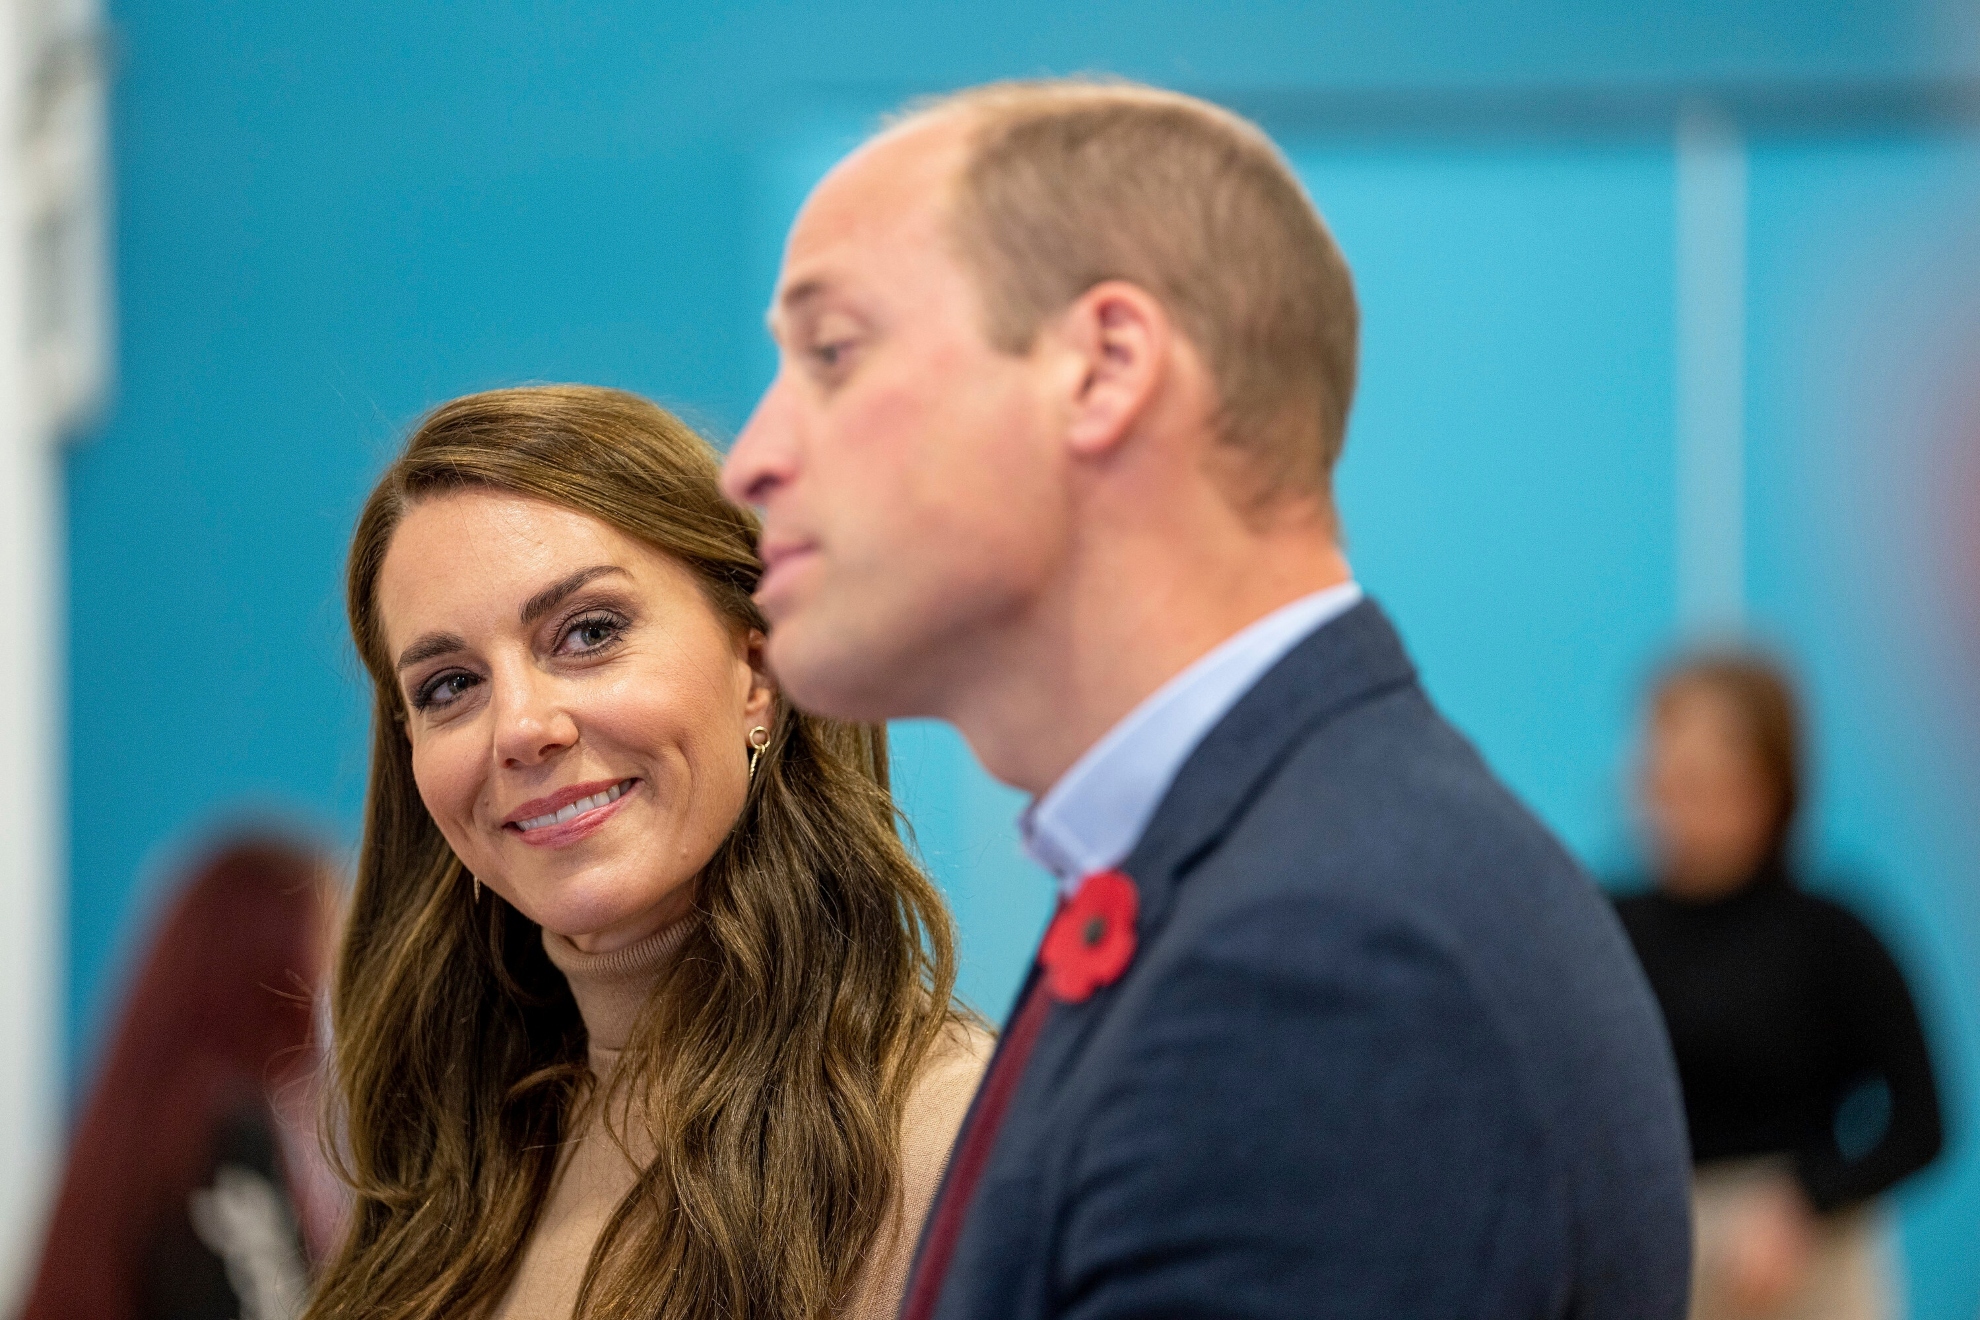 A peek inside Prince William and Kates nicknames and love story